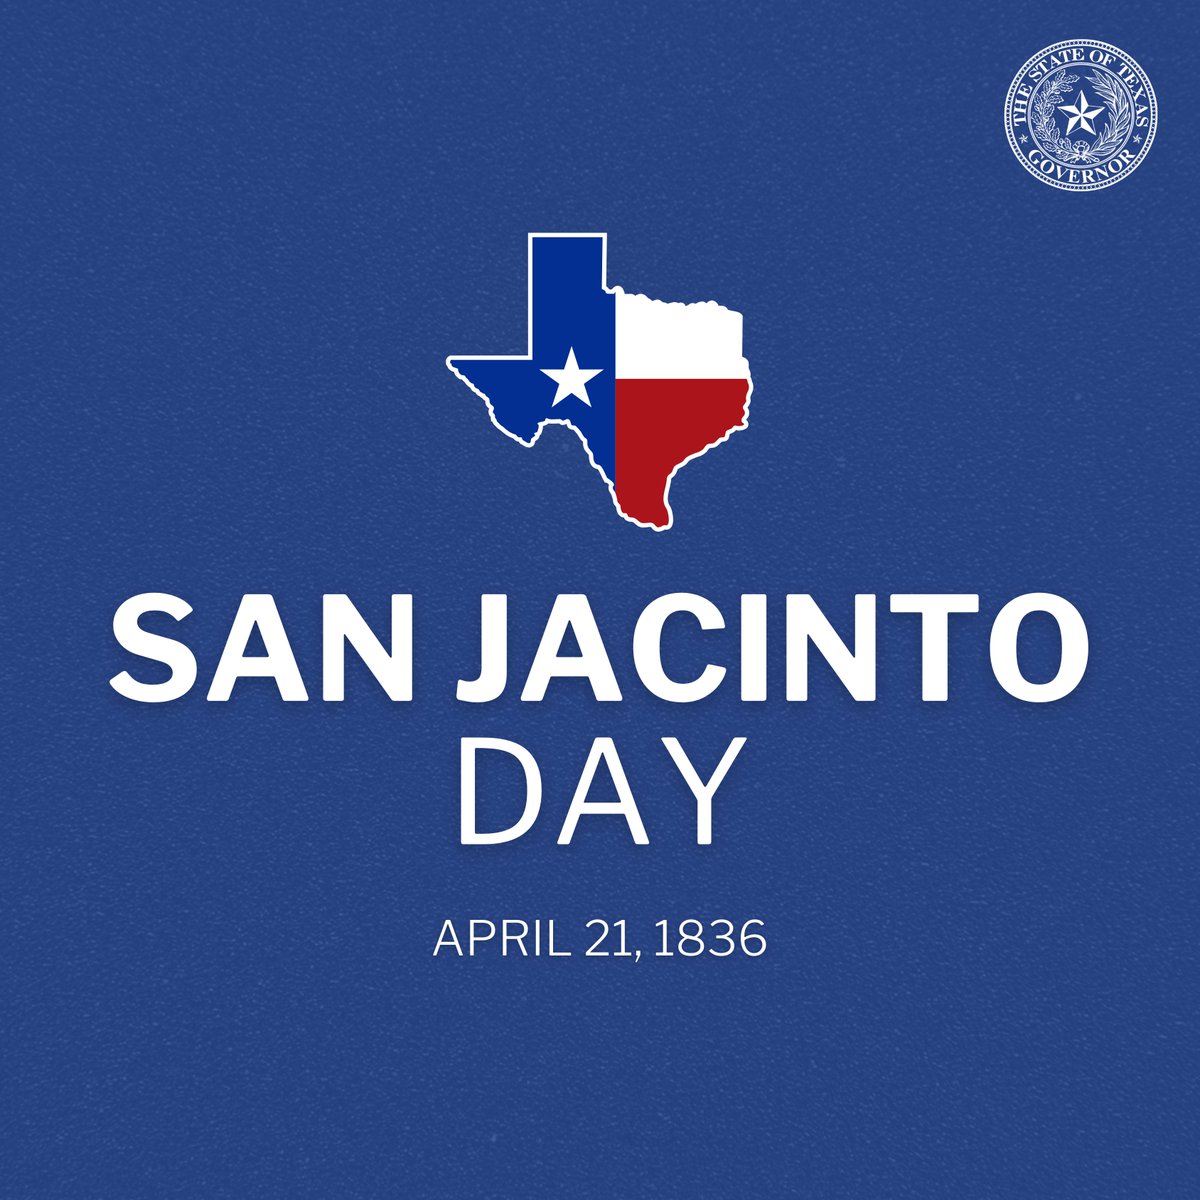 On this day 188 years ago, 800 brave Texans fought to secure our independence from Mexico. The land they freed is now the greatest state in the greatest country in the history of the world. Happy San Jacinto Day!